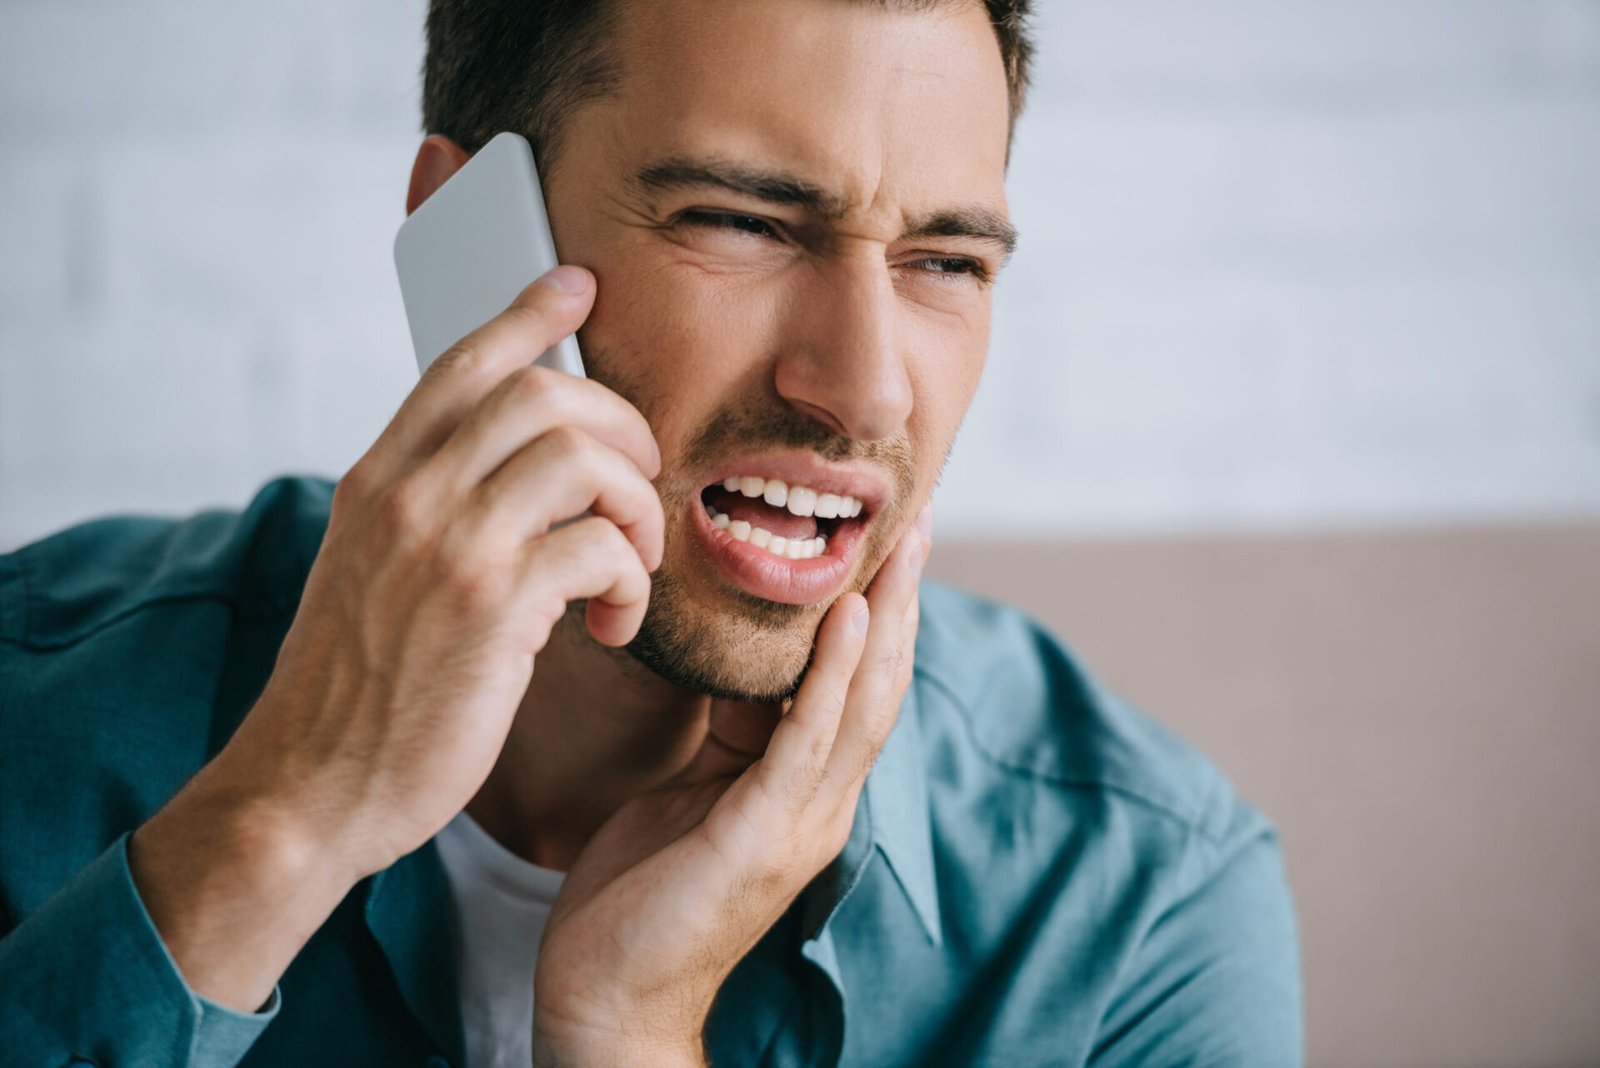 Image of a man who looks like he is in pain calling a dental practitioner